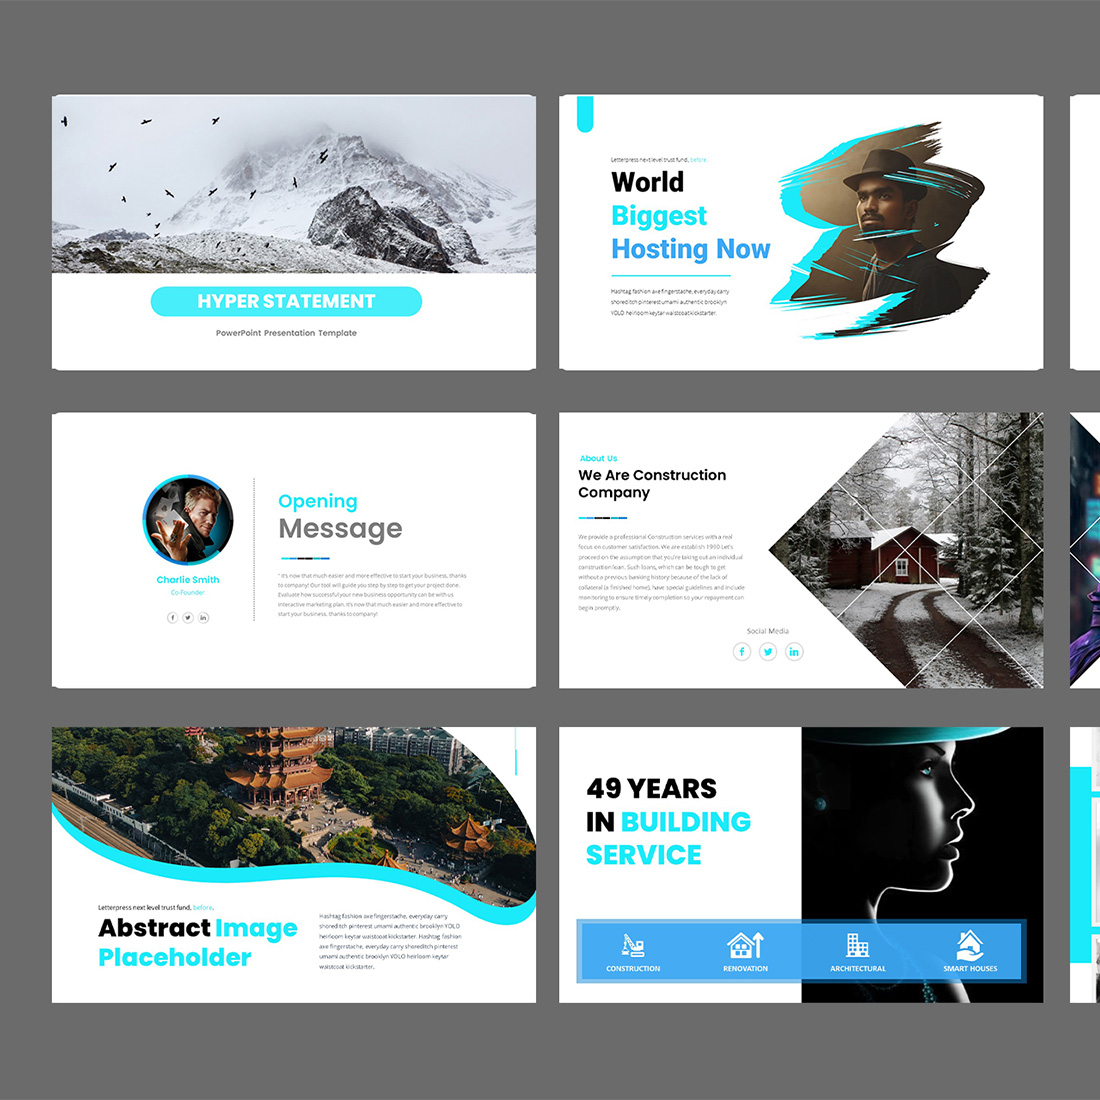 Hyper Animated Quick Keynote Presentation Template cover image.